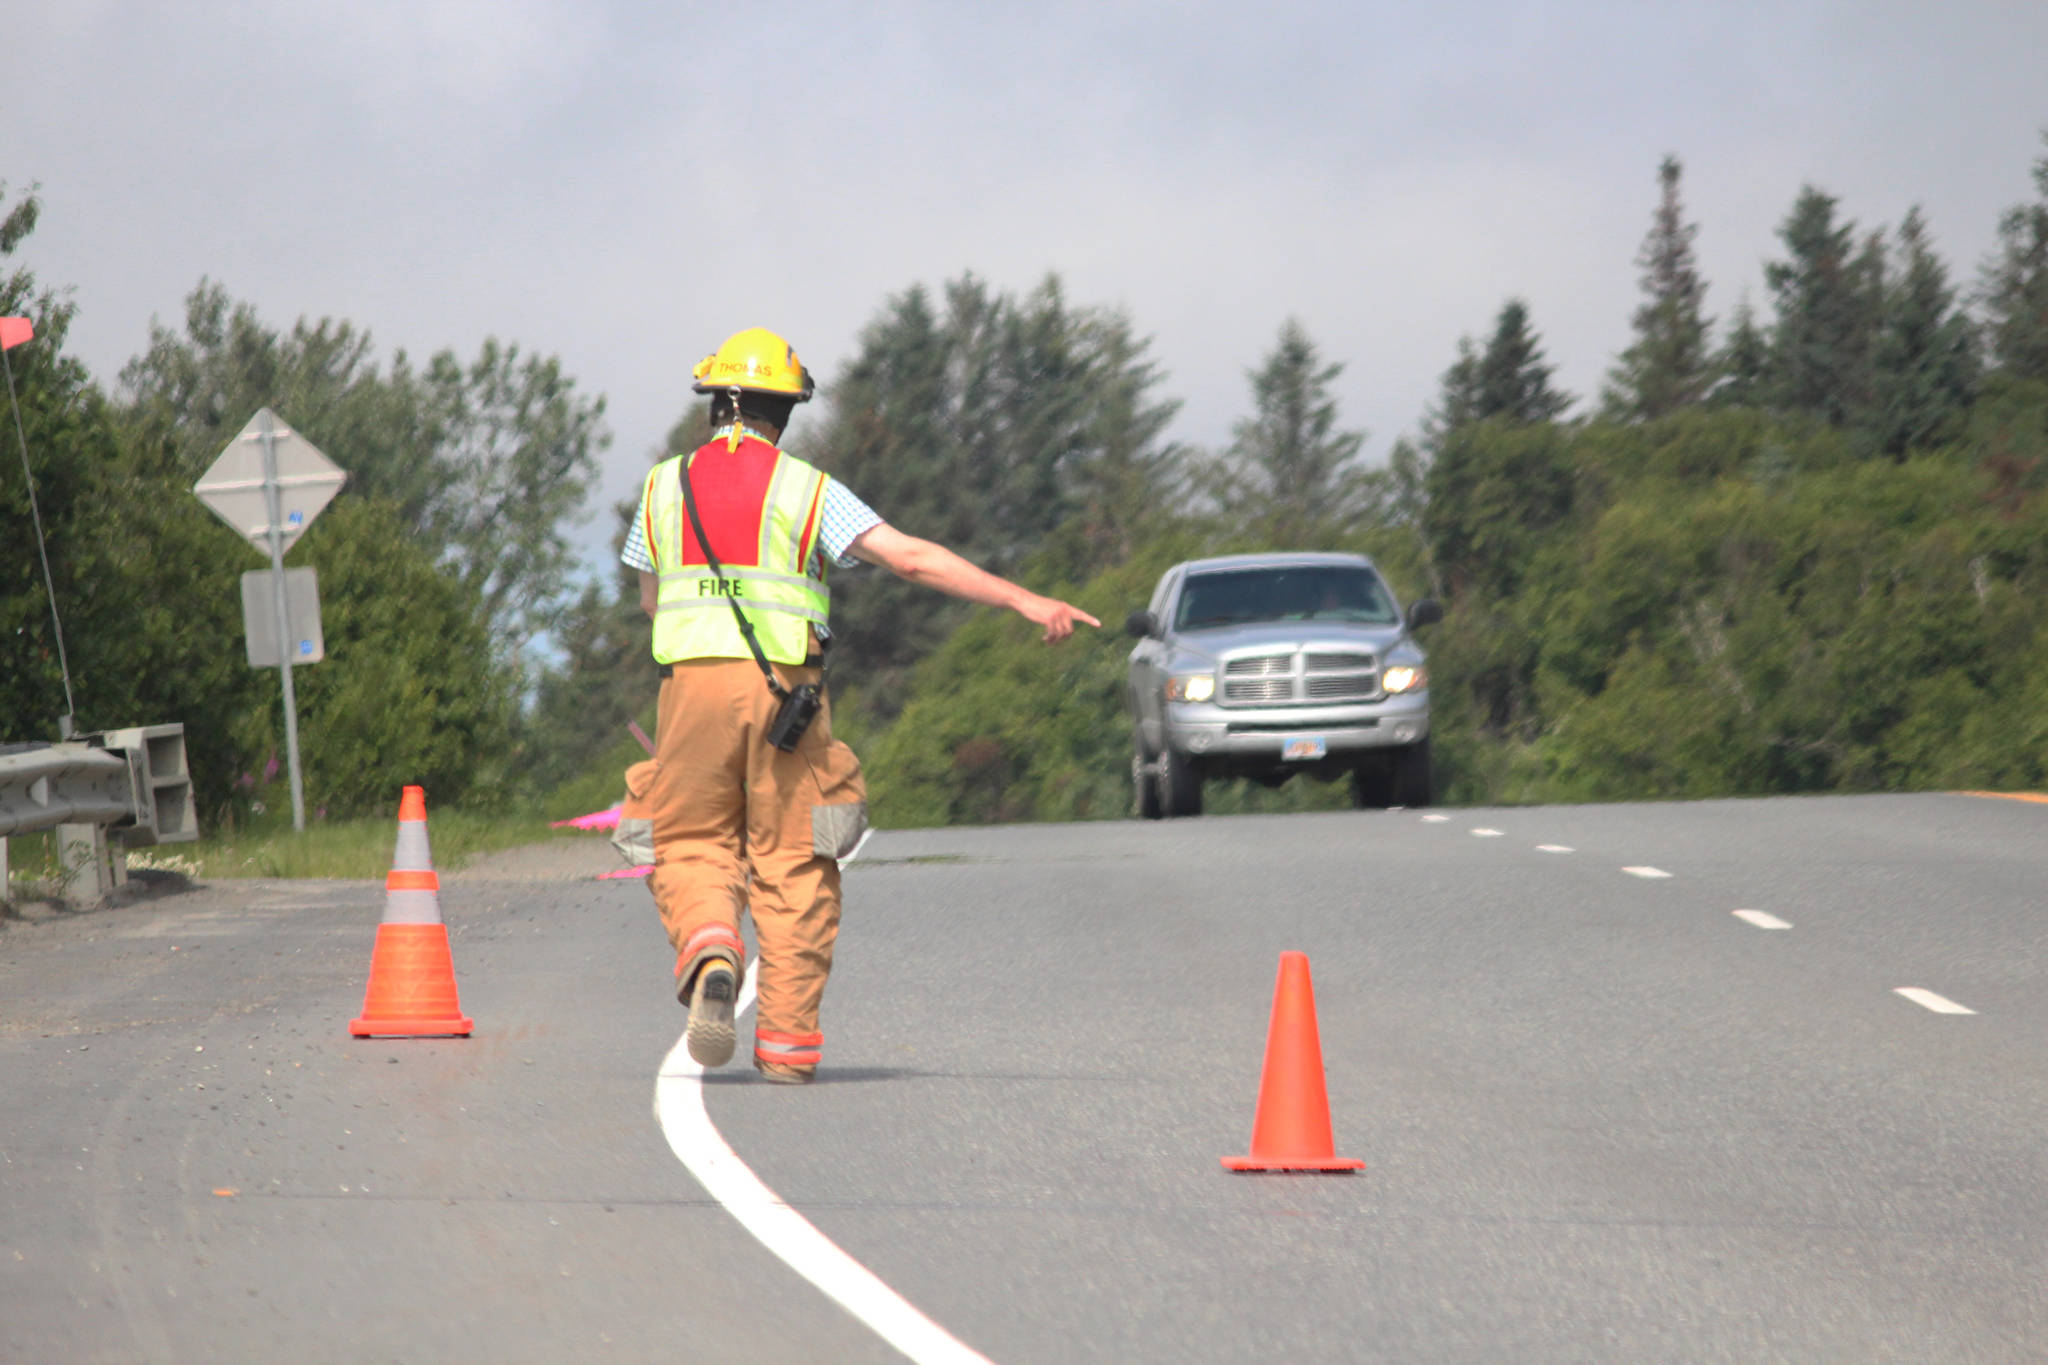 A first responder directs an oncoming truck around the cones set out to give crews space while they responded to a report of a truck that had fallen over the edge near Baycrest Overlook on Monday, July 24, 2017 in Homer, Alaska. First responders found the pickup truck that had fallen over the edge after hitting a guard rail, and searched for a possible victim until getting a report that the driver had crashed several days earlier and had walked away uninjured. Photo by Megan Pacer/Homer News